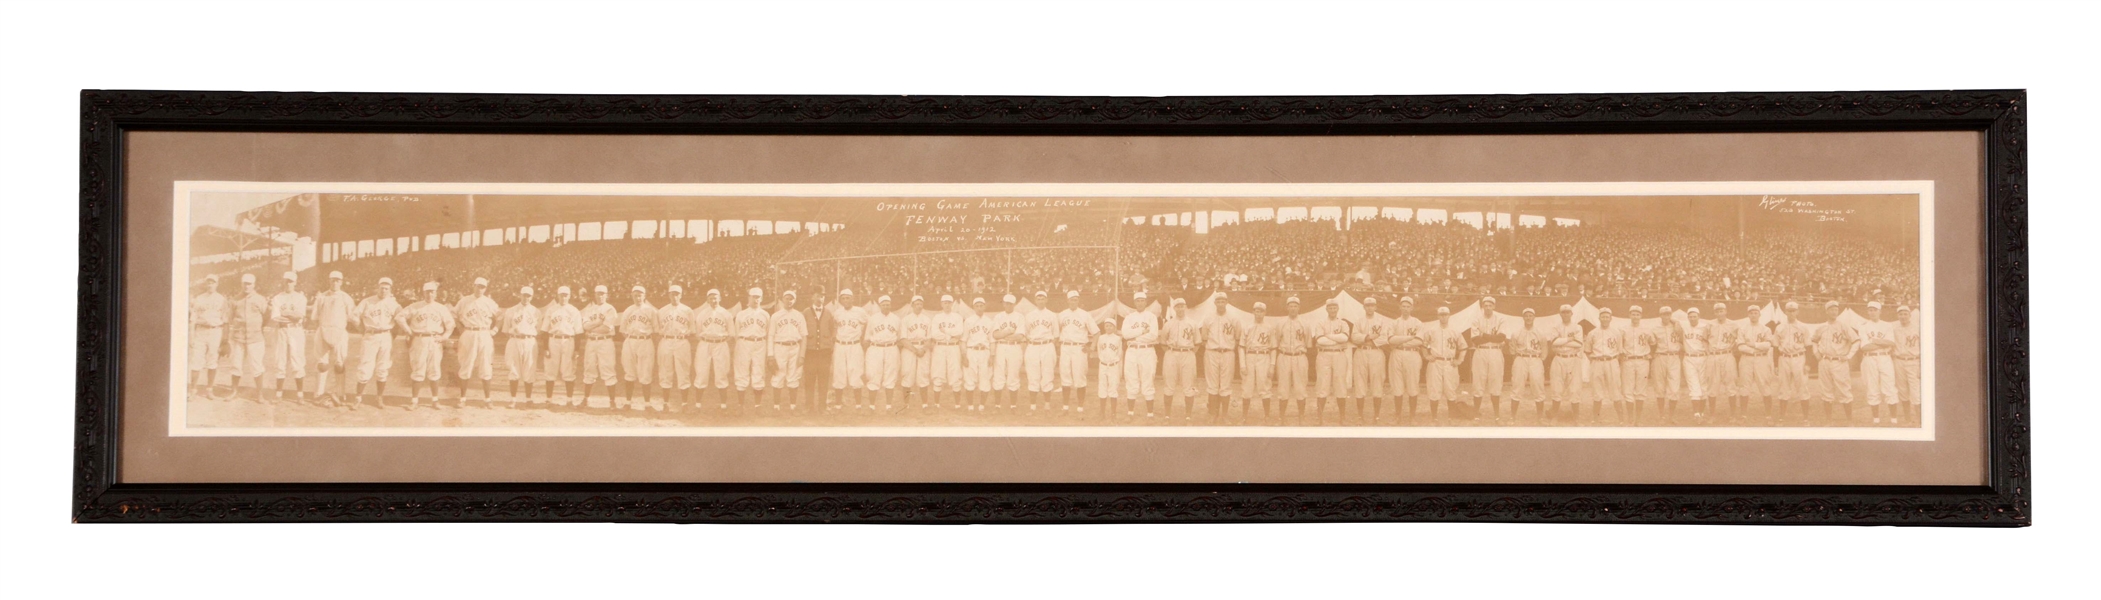 1912 OPENING OF FENWAY PARK RED SOX VS YANKEES PANORAMIC